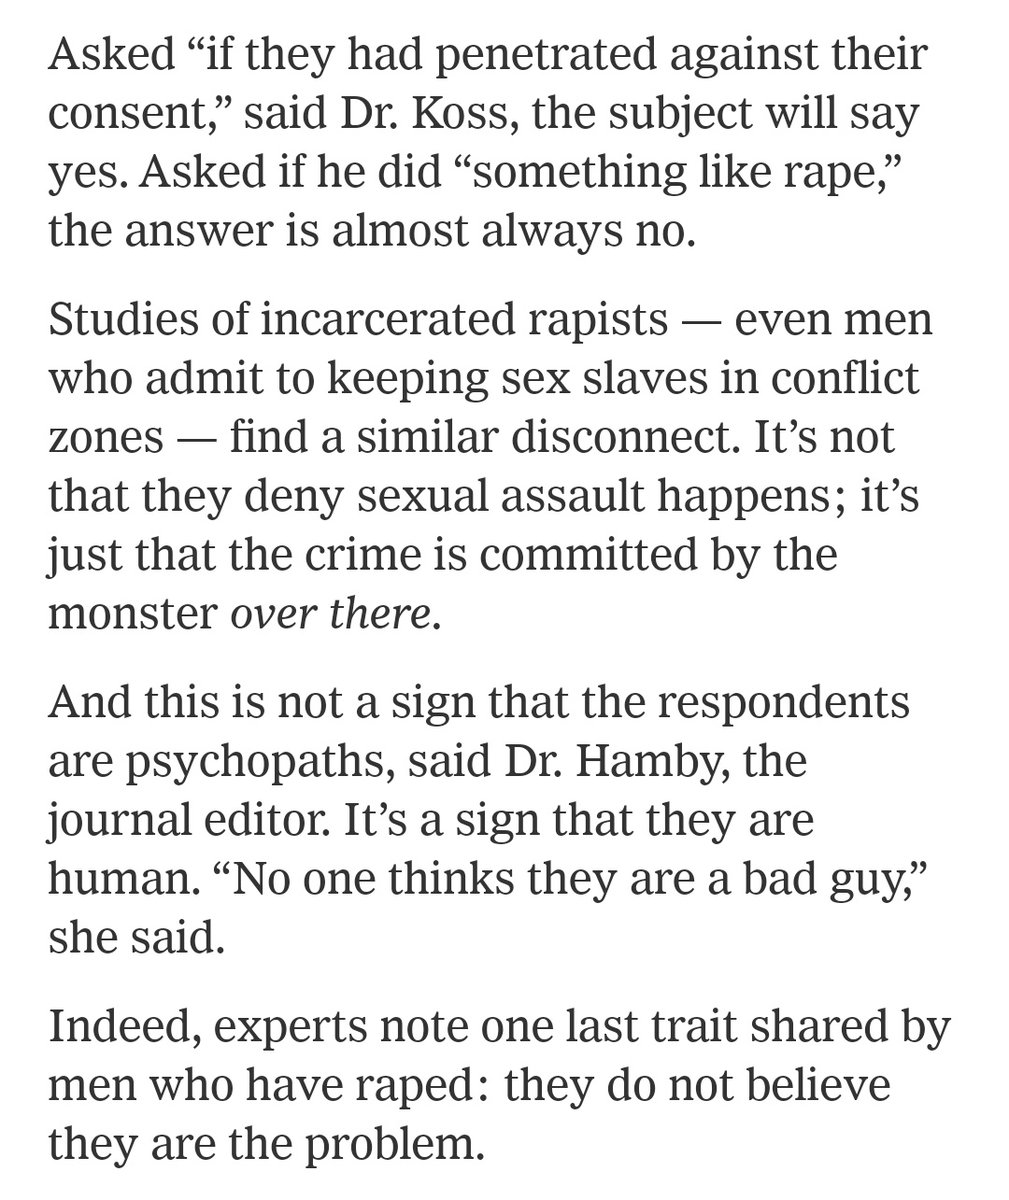 "And this is not a sign that the respondents are psychopaths...It’s a sign that they are human. “No one thinks they are a bad guy,” she said""Indeed, experts note one last trait shared by men who have raped: they do not believe they are the problem." https://www.nytimes.com/2017/10/30/health/men-rape-sexual-assault.html?smid=tw-share